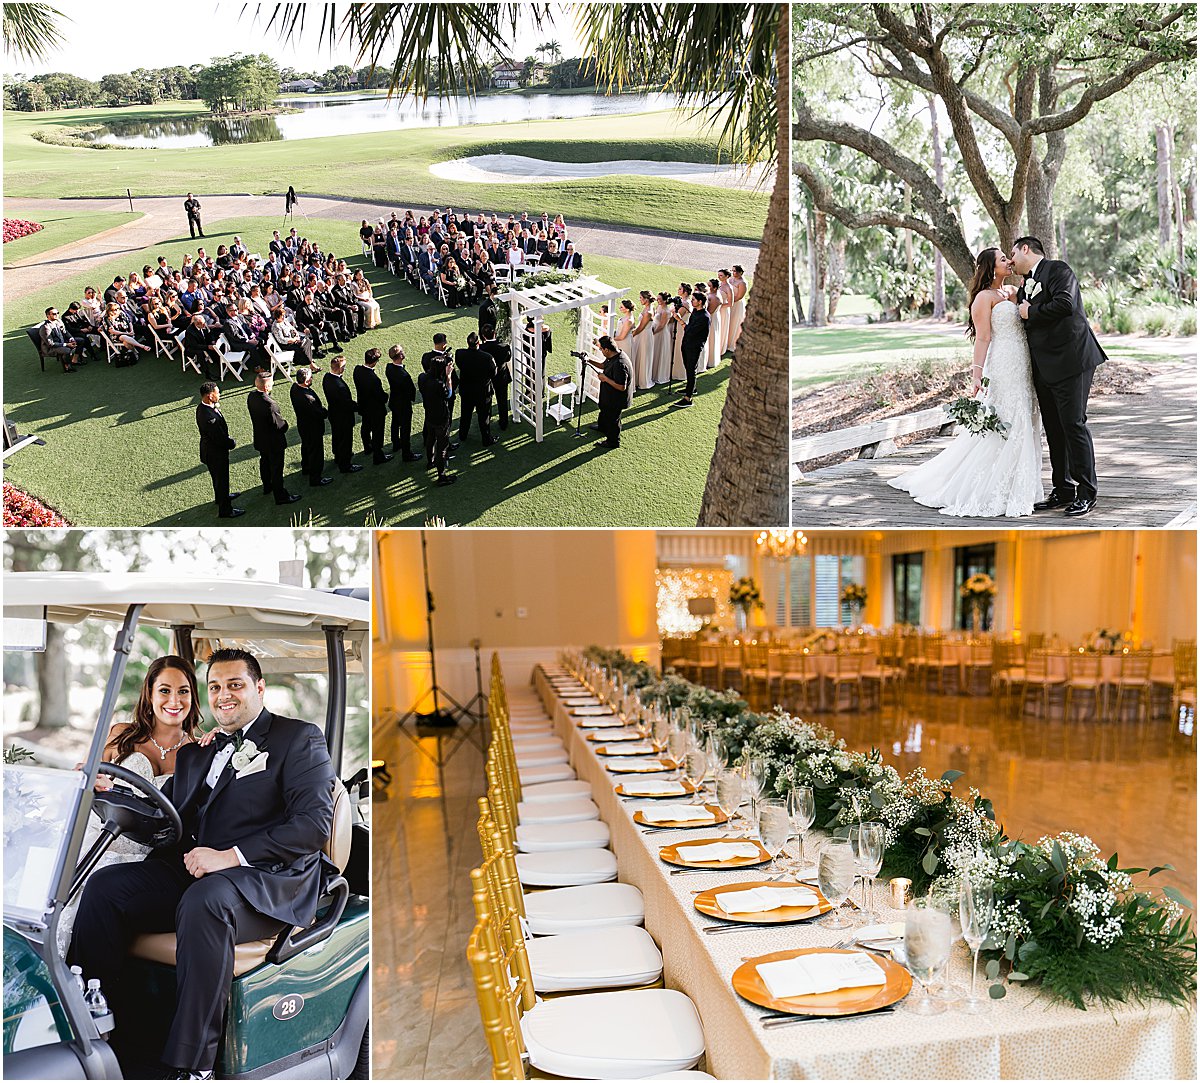 Traditional and Elegant Wedding at Breakers West Country Club | Married in Palm Beach | www.marriedinpalmbeach.com | Blink & Co Photography